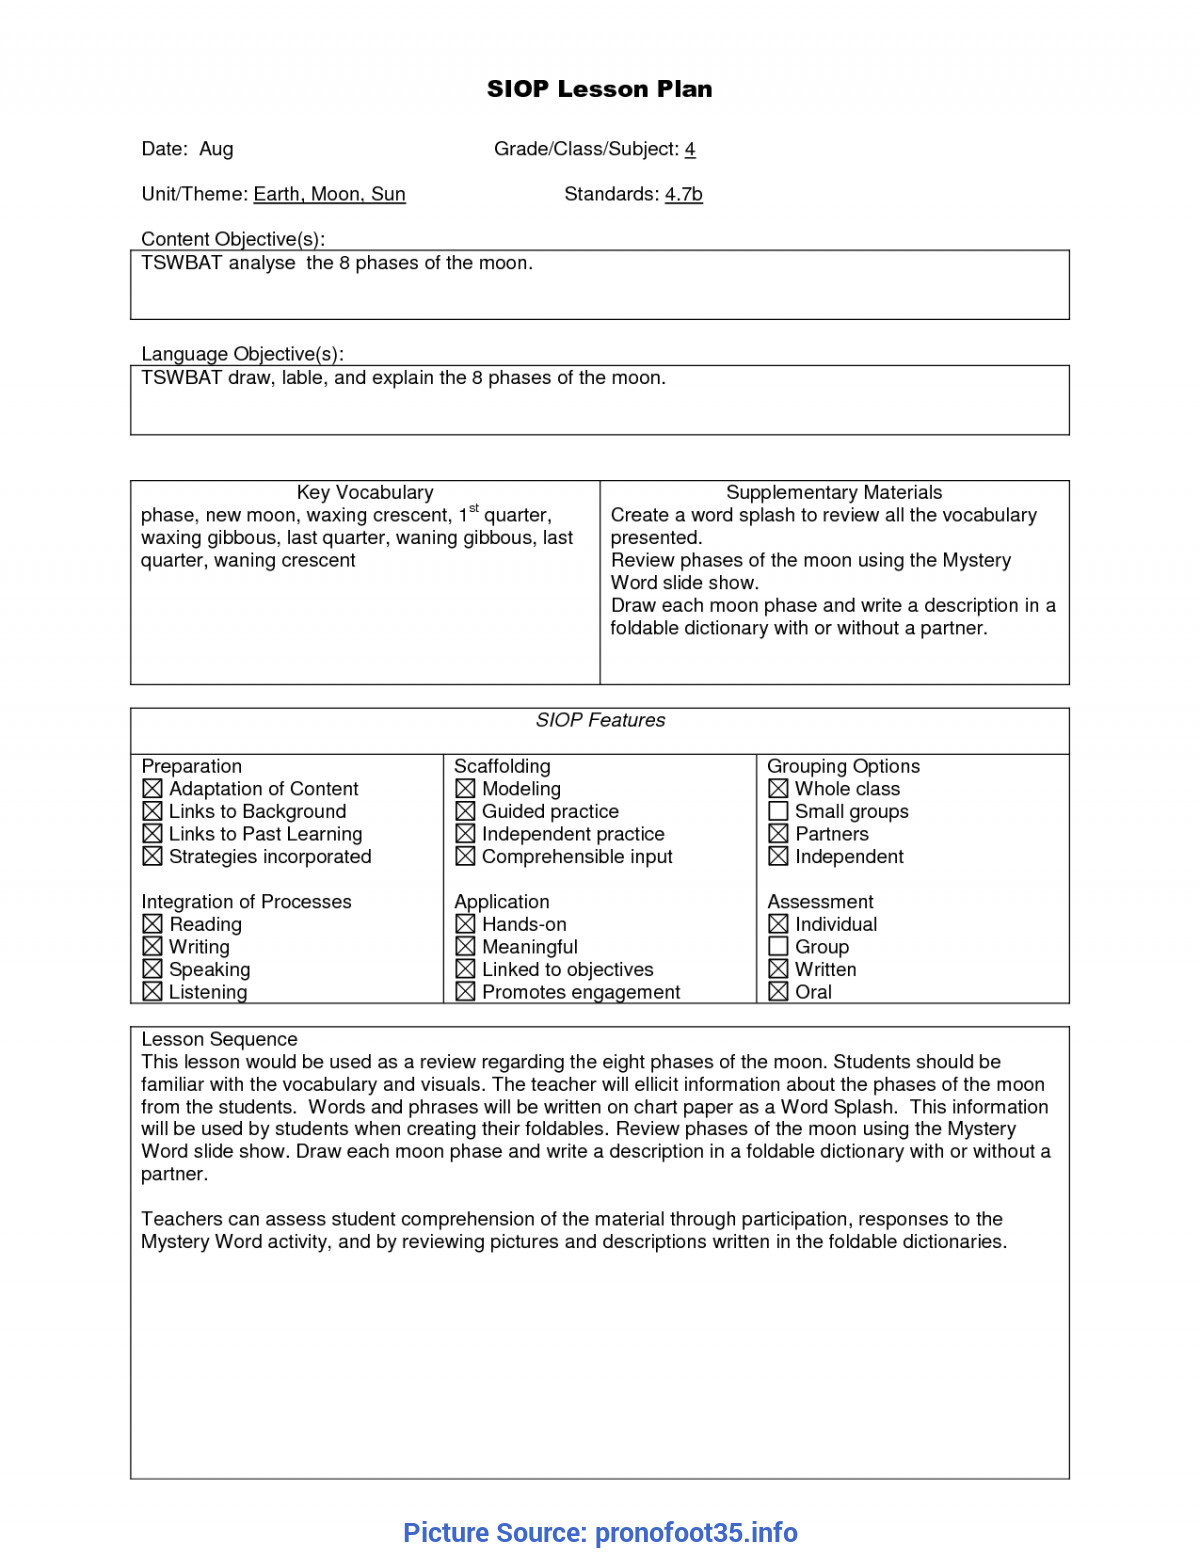 Siop Lesson Plan Examples Best Lessons Learned Report Example Lessons Learned